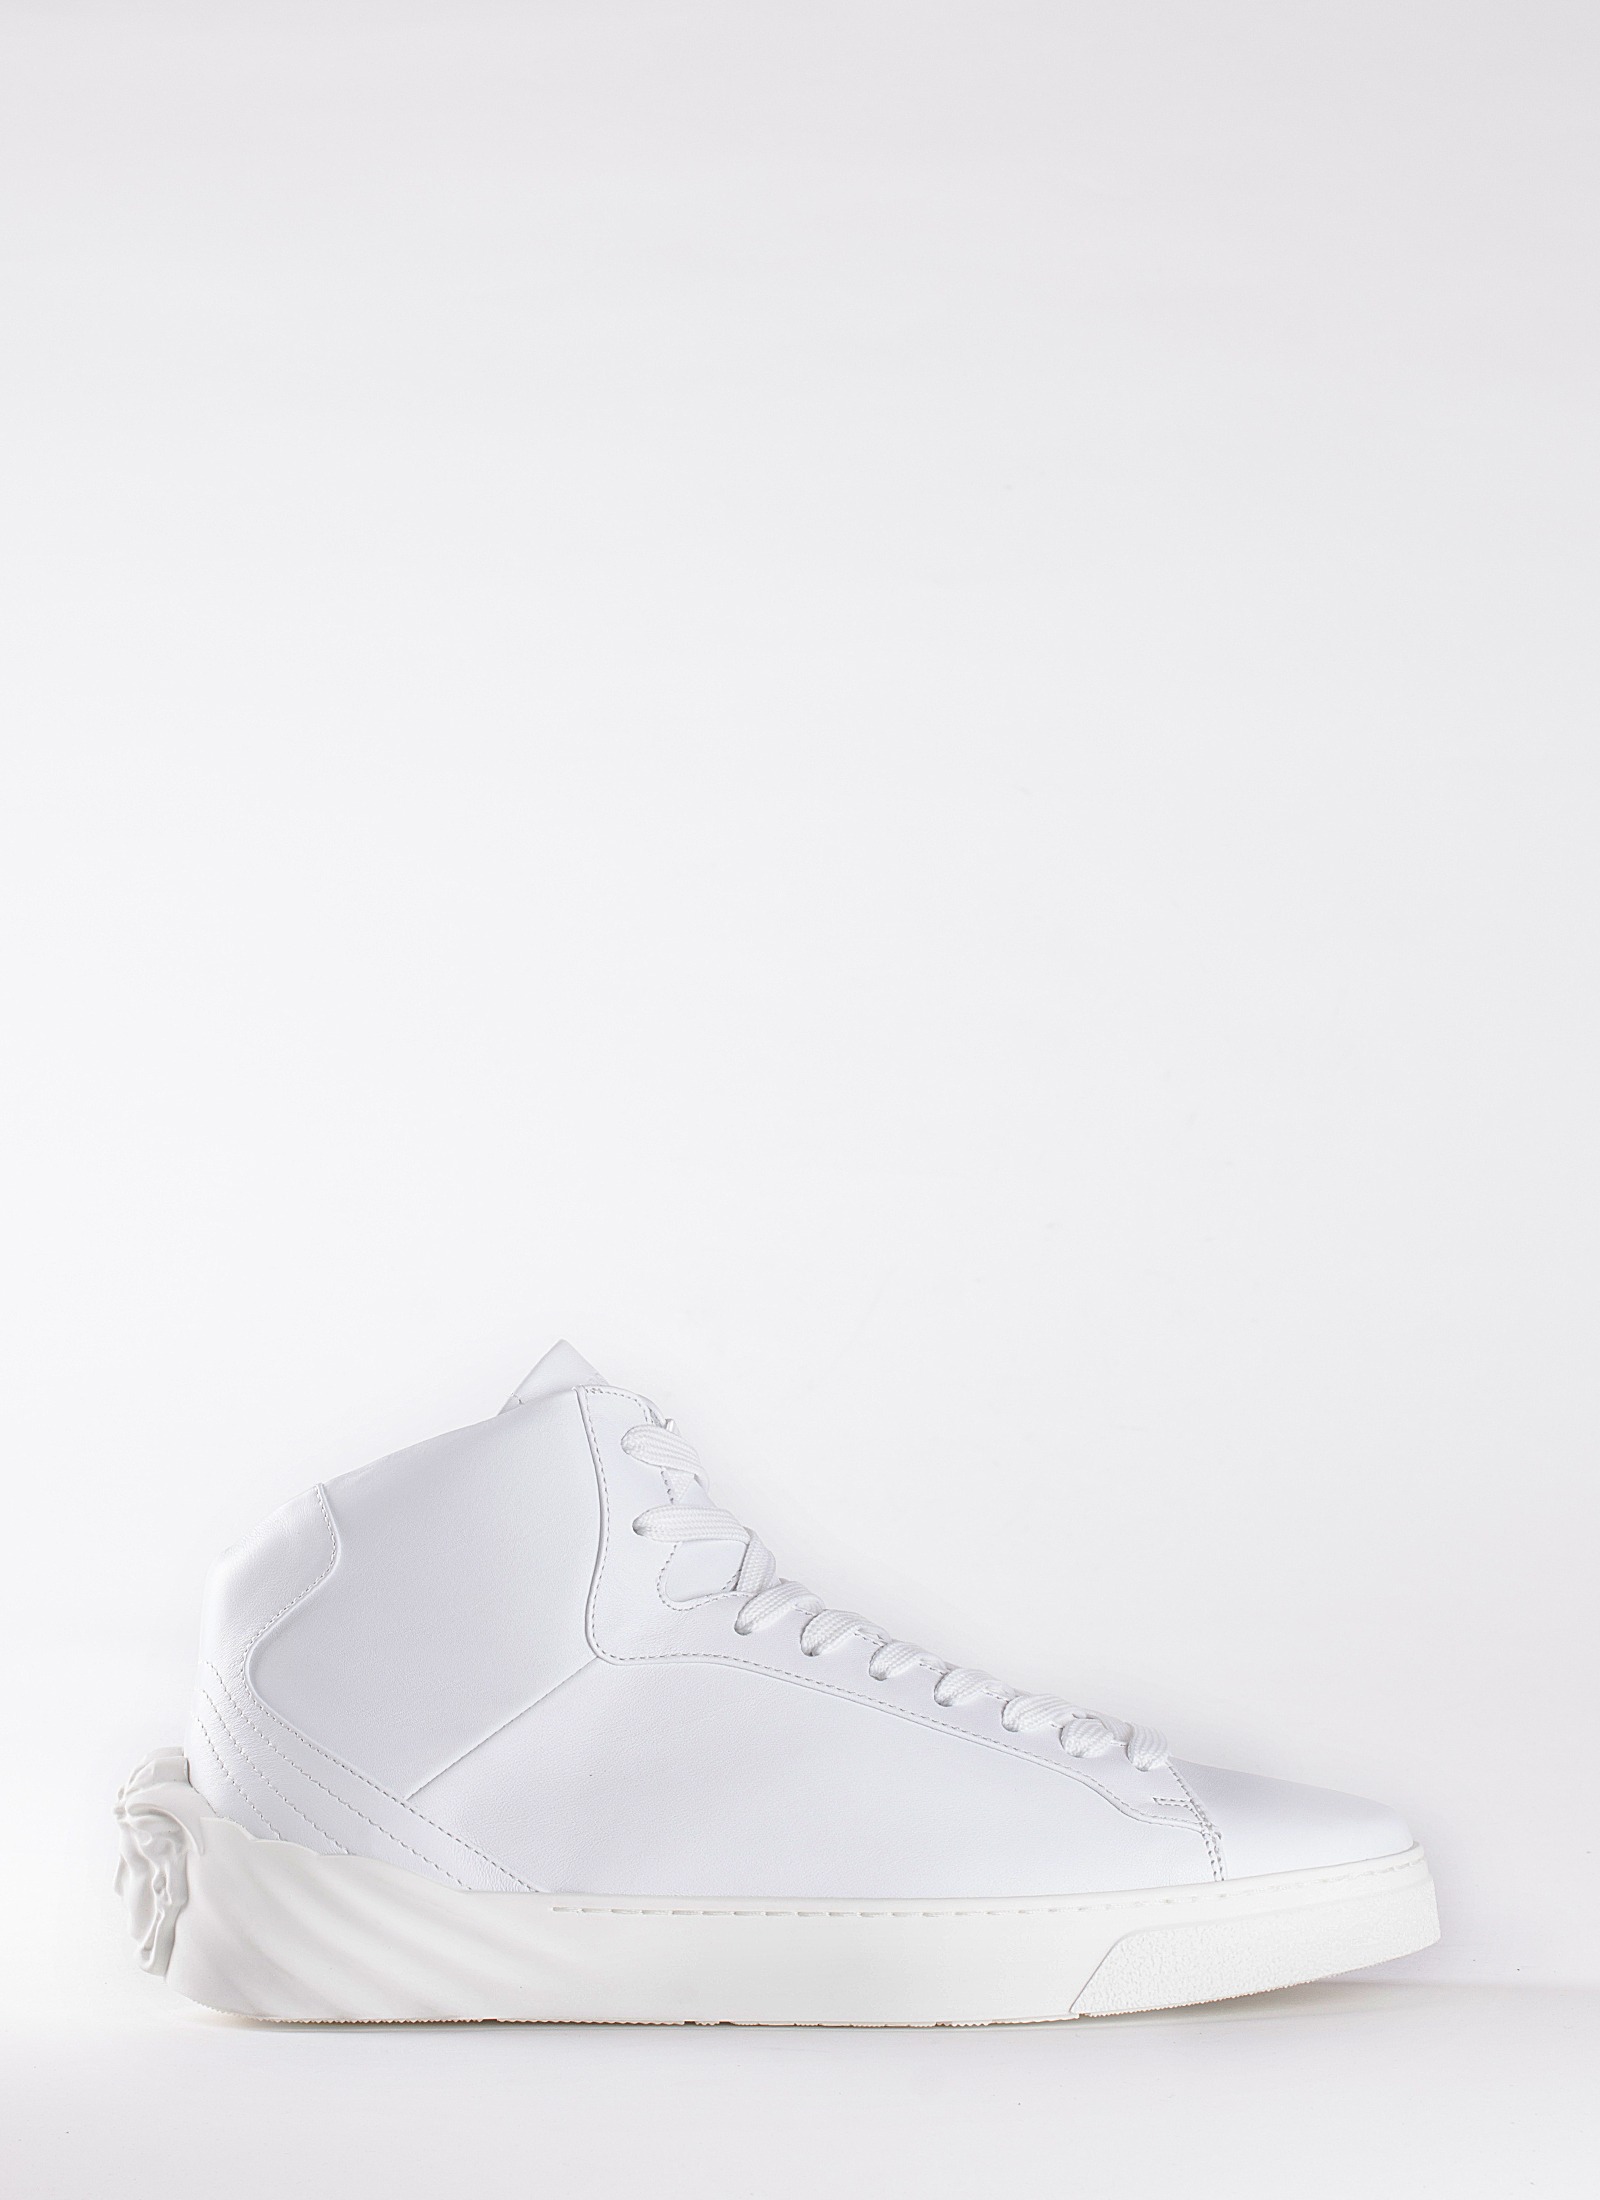 LEATHER HIGH SNEAKERS "MEDUSA" - VERSACE